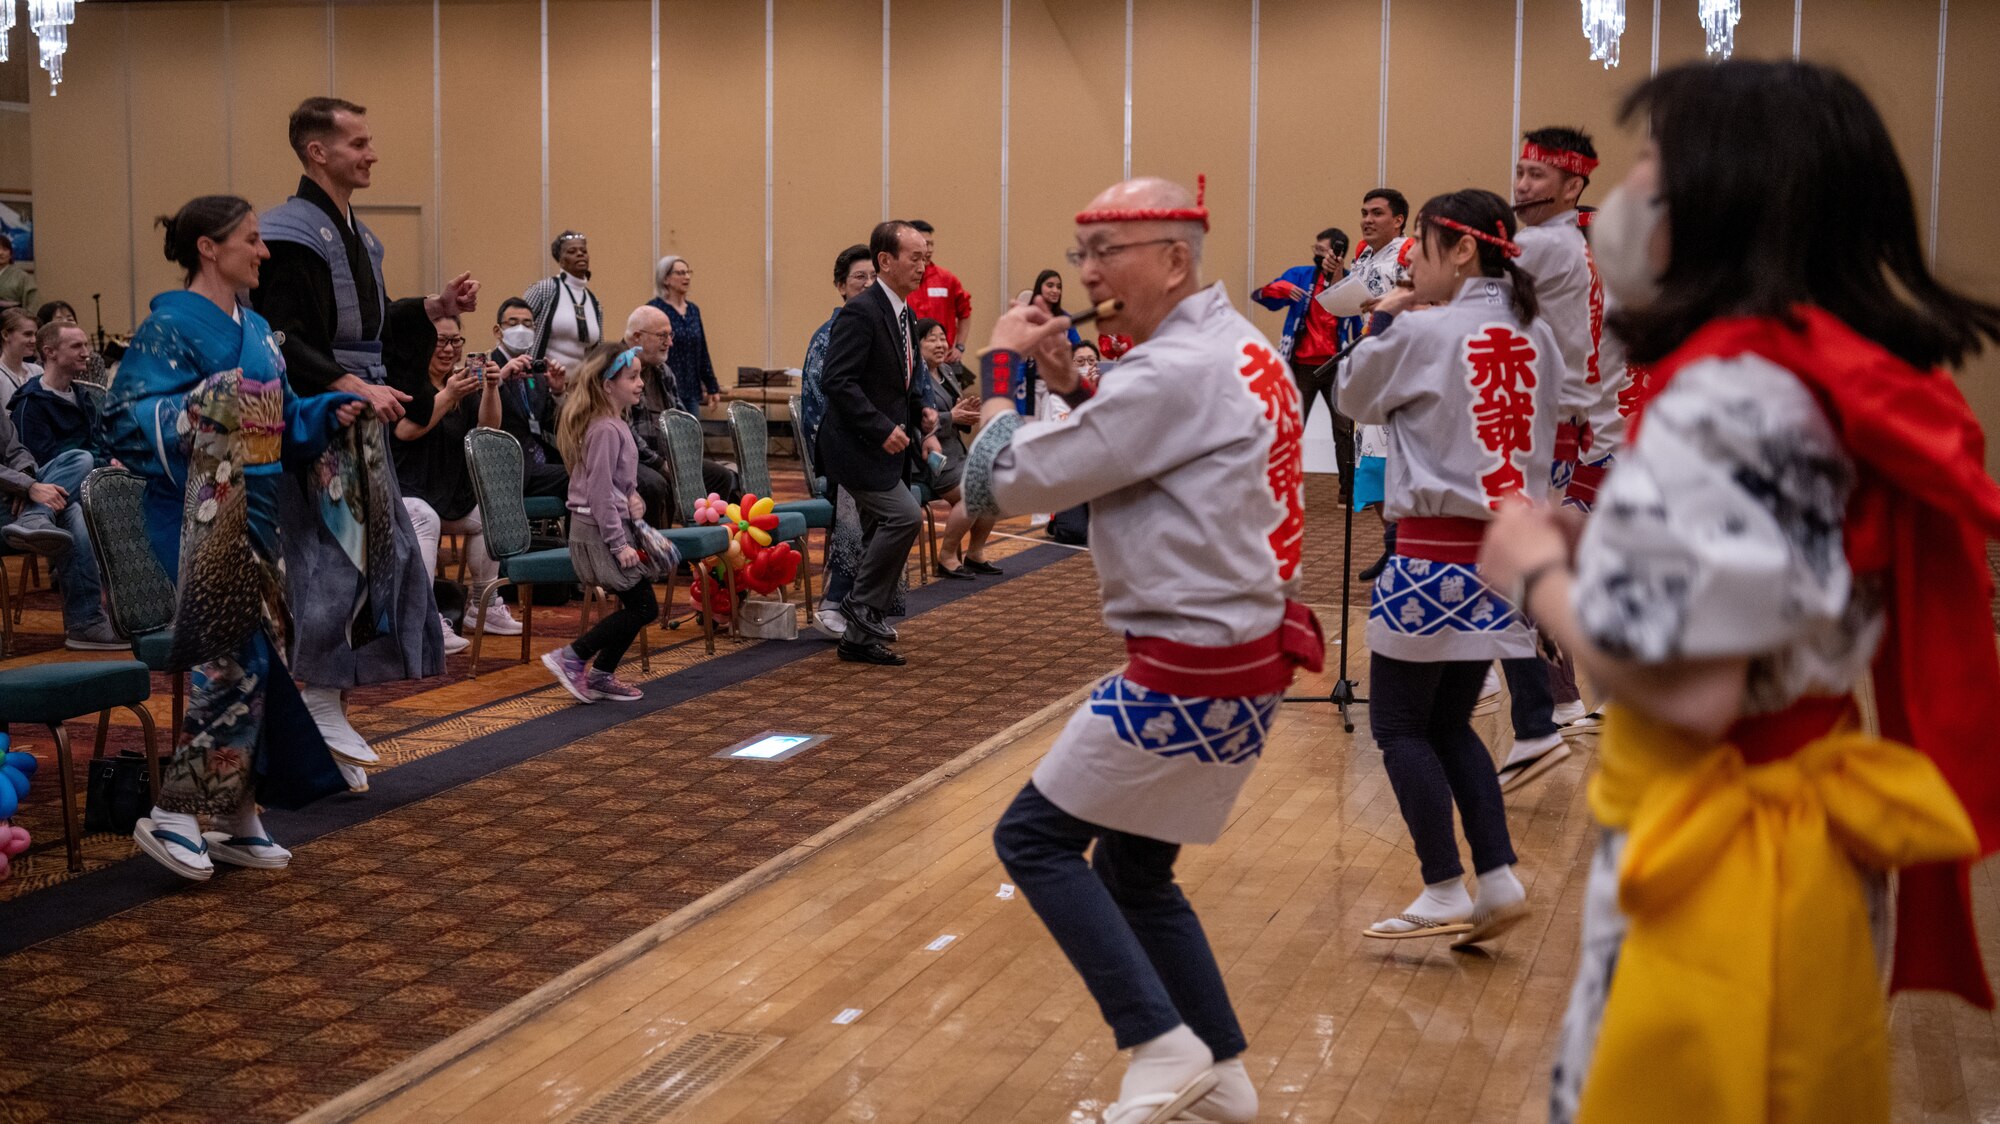 Japan Day is an event where Japanese culture and its traditions are introduced to Misawa Air Base service members and their families, offering the opportunity to be immersed into an event that hosted hands-on booths, dance performances, Japanese horseback archery and calligraphy.